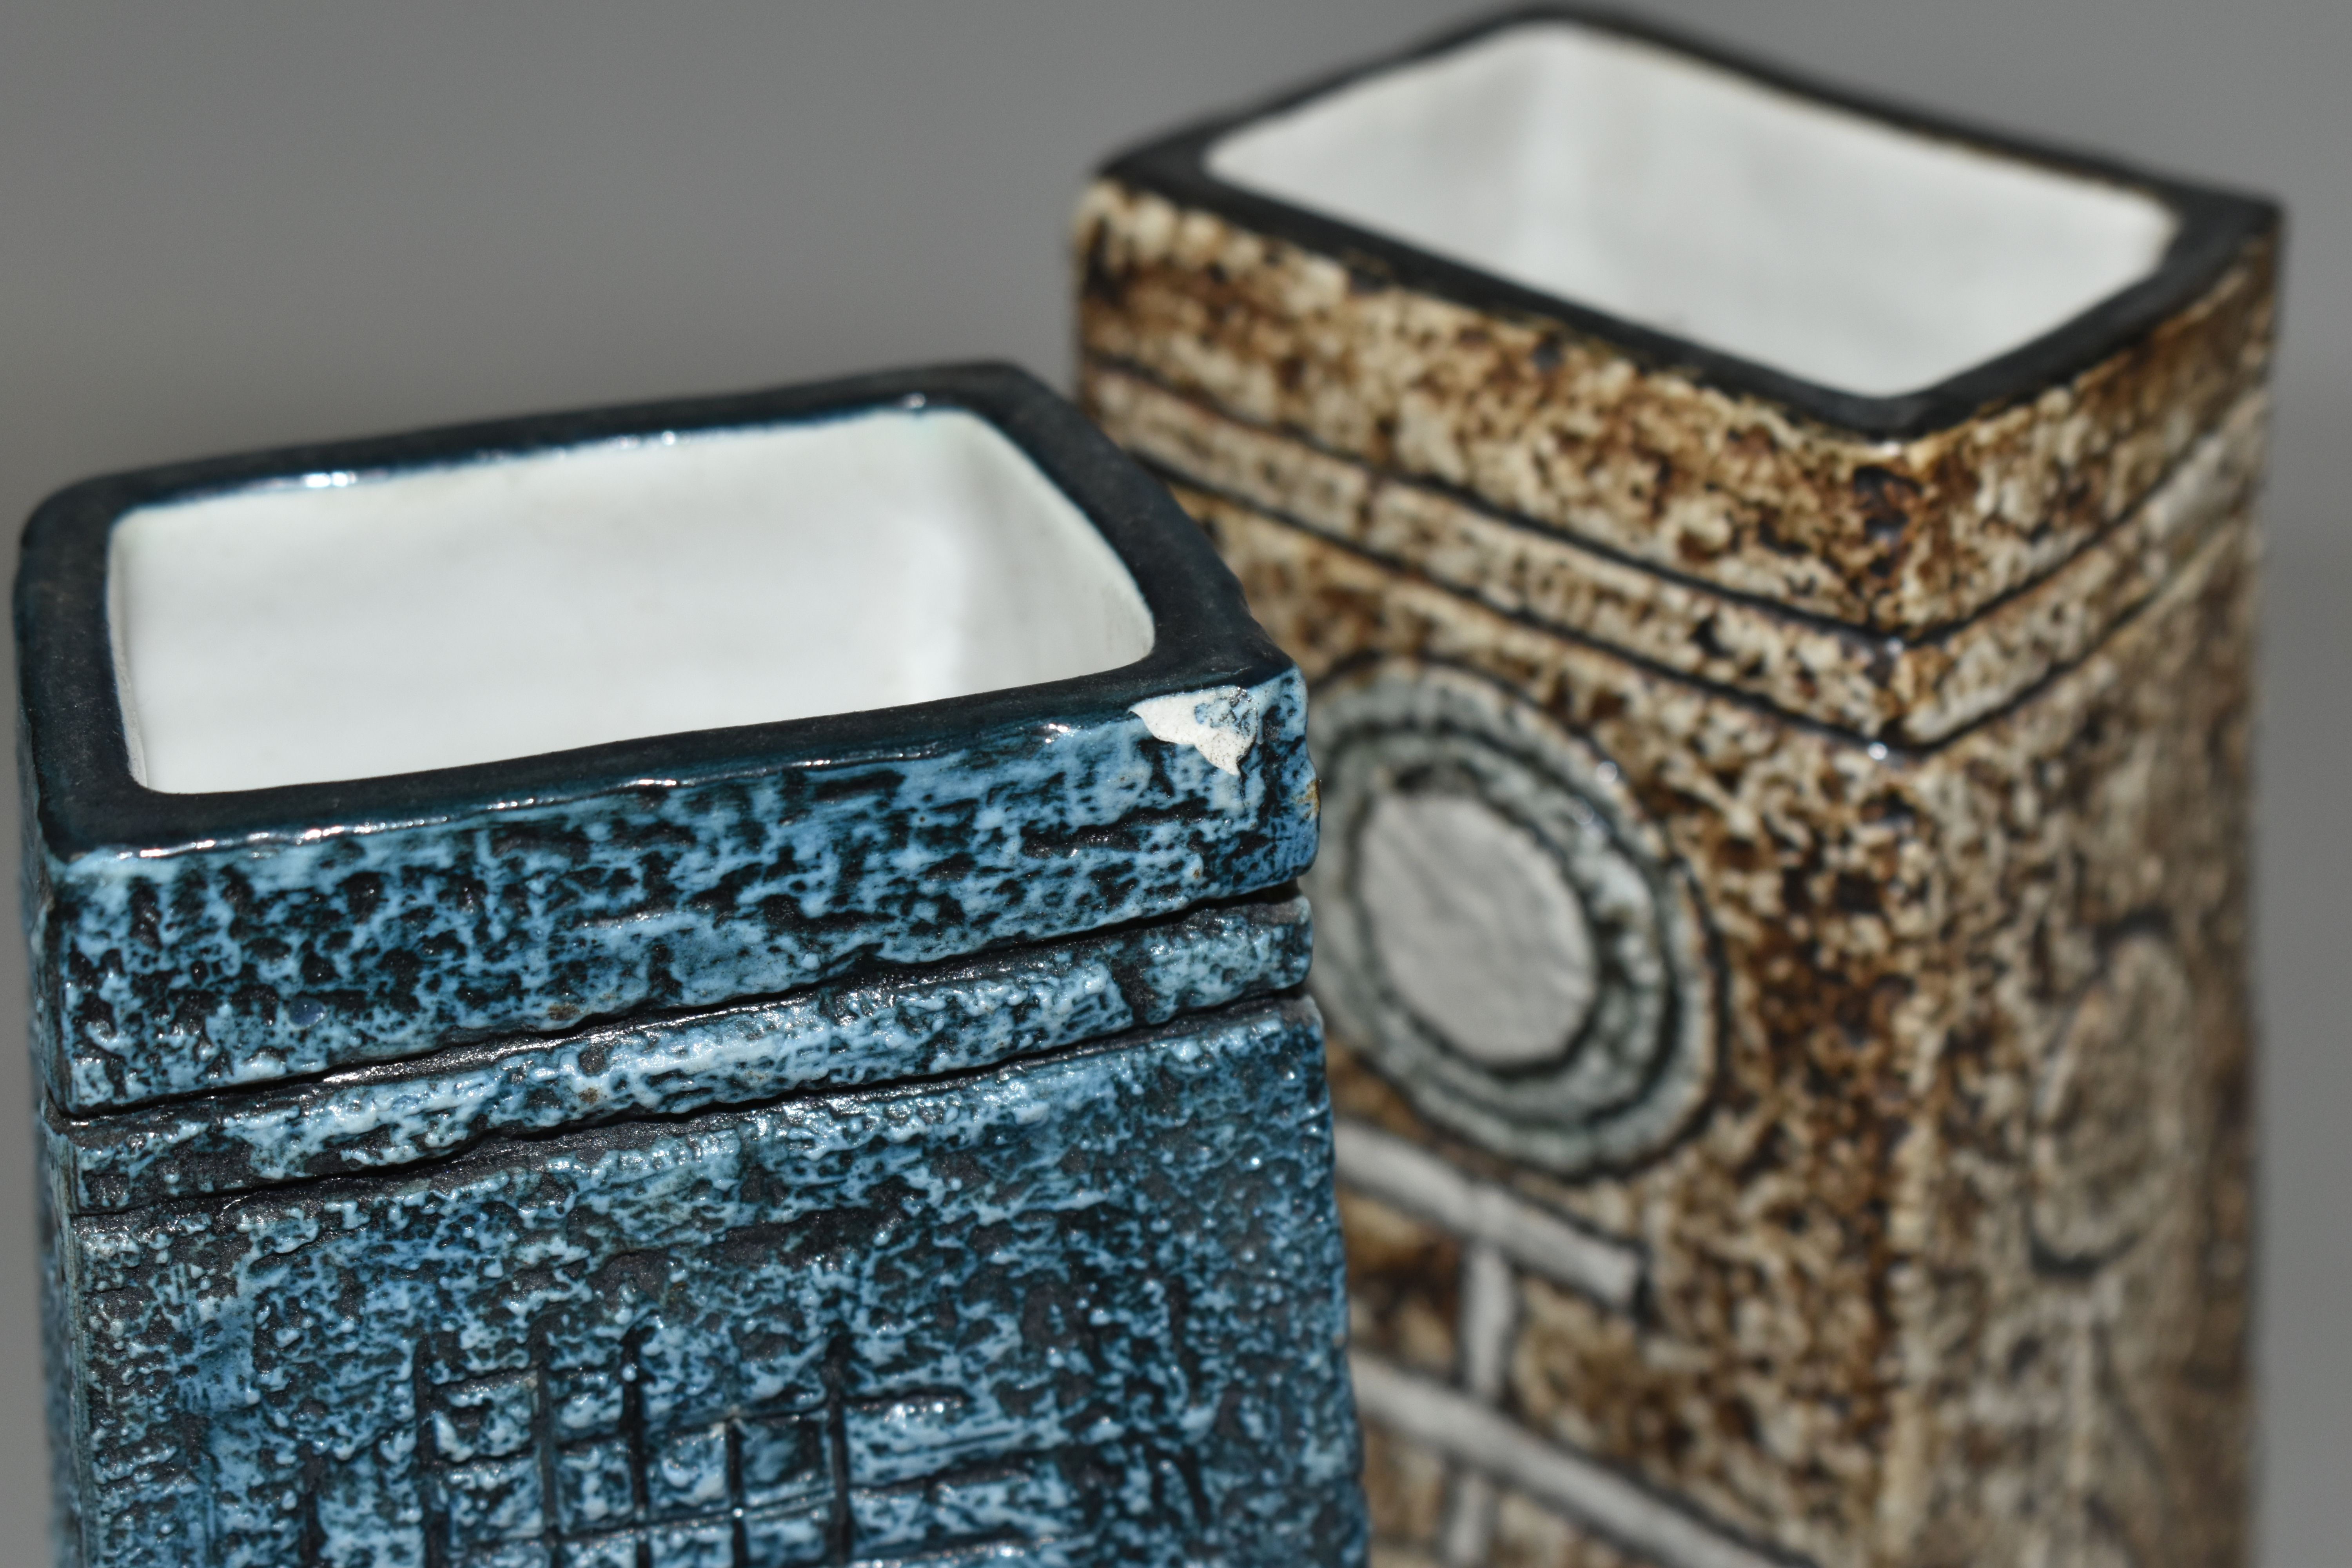 TWO TROIKA POTTERY COFFIN VASES, in shades of blue, grey and brown, with impressed and incised - Image 5 of 7